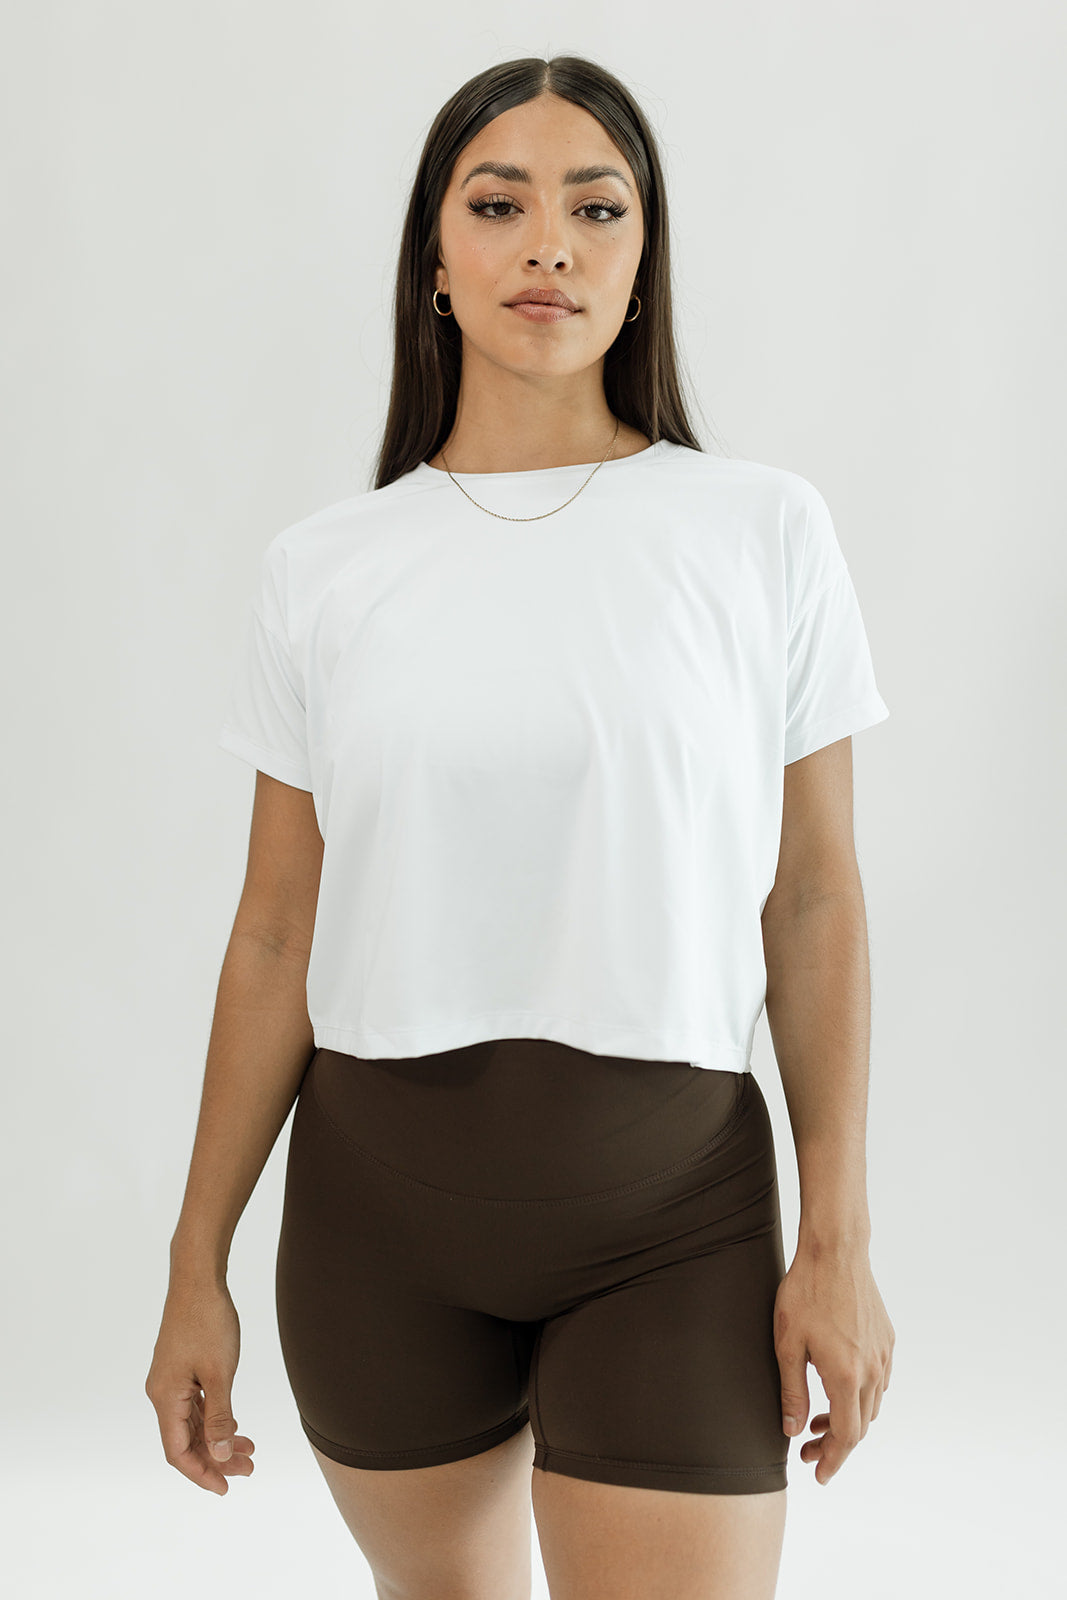 Cloud White Cropped Tee, perfect for workouts and athleisure. Pair with Volare leggings , Biker Shorts, Joggers, or jeans. The Perfect Tee